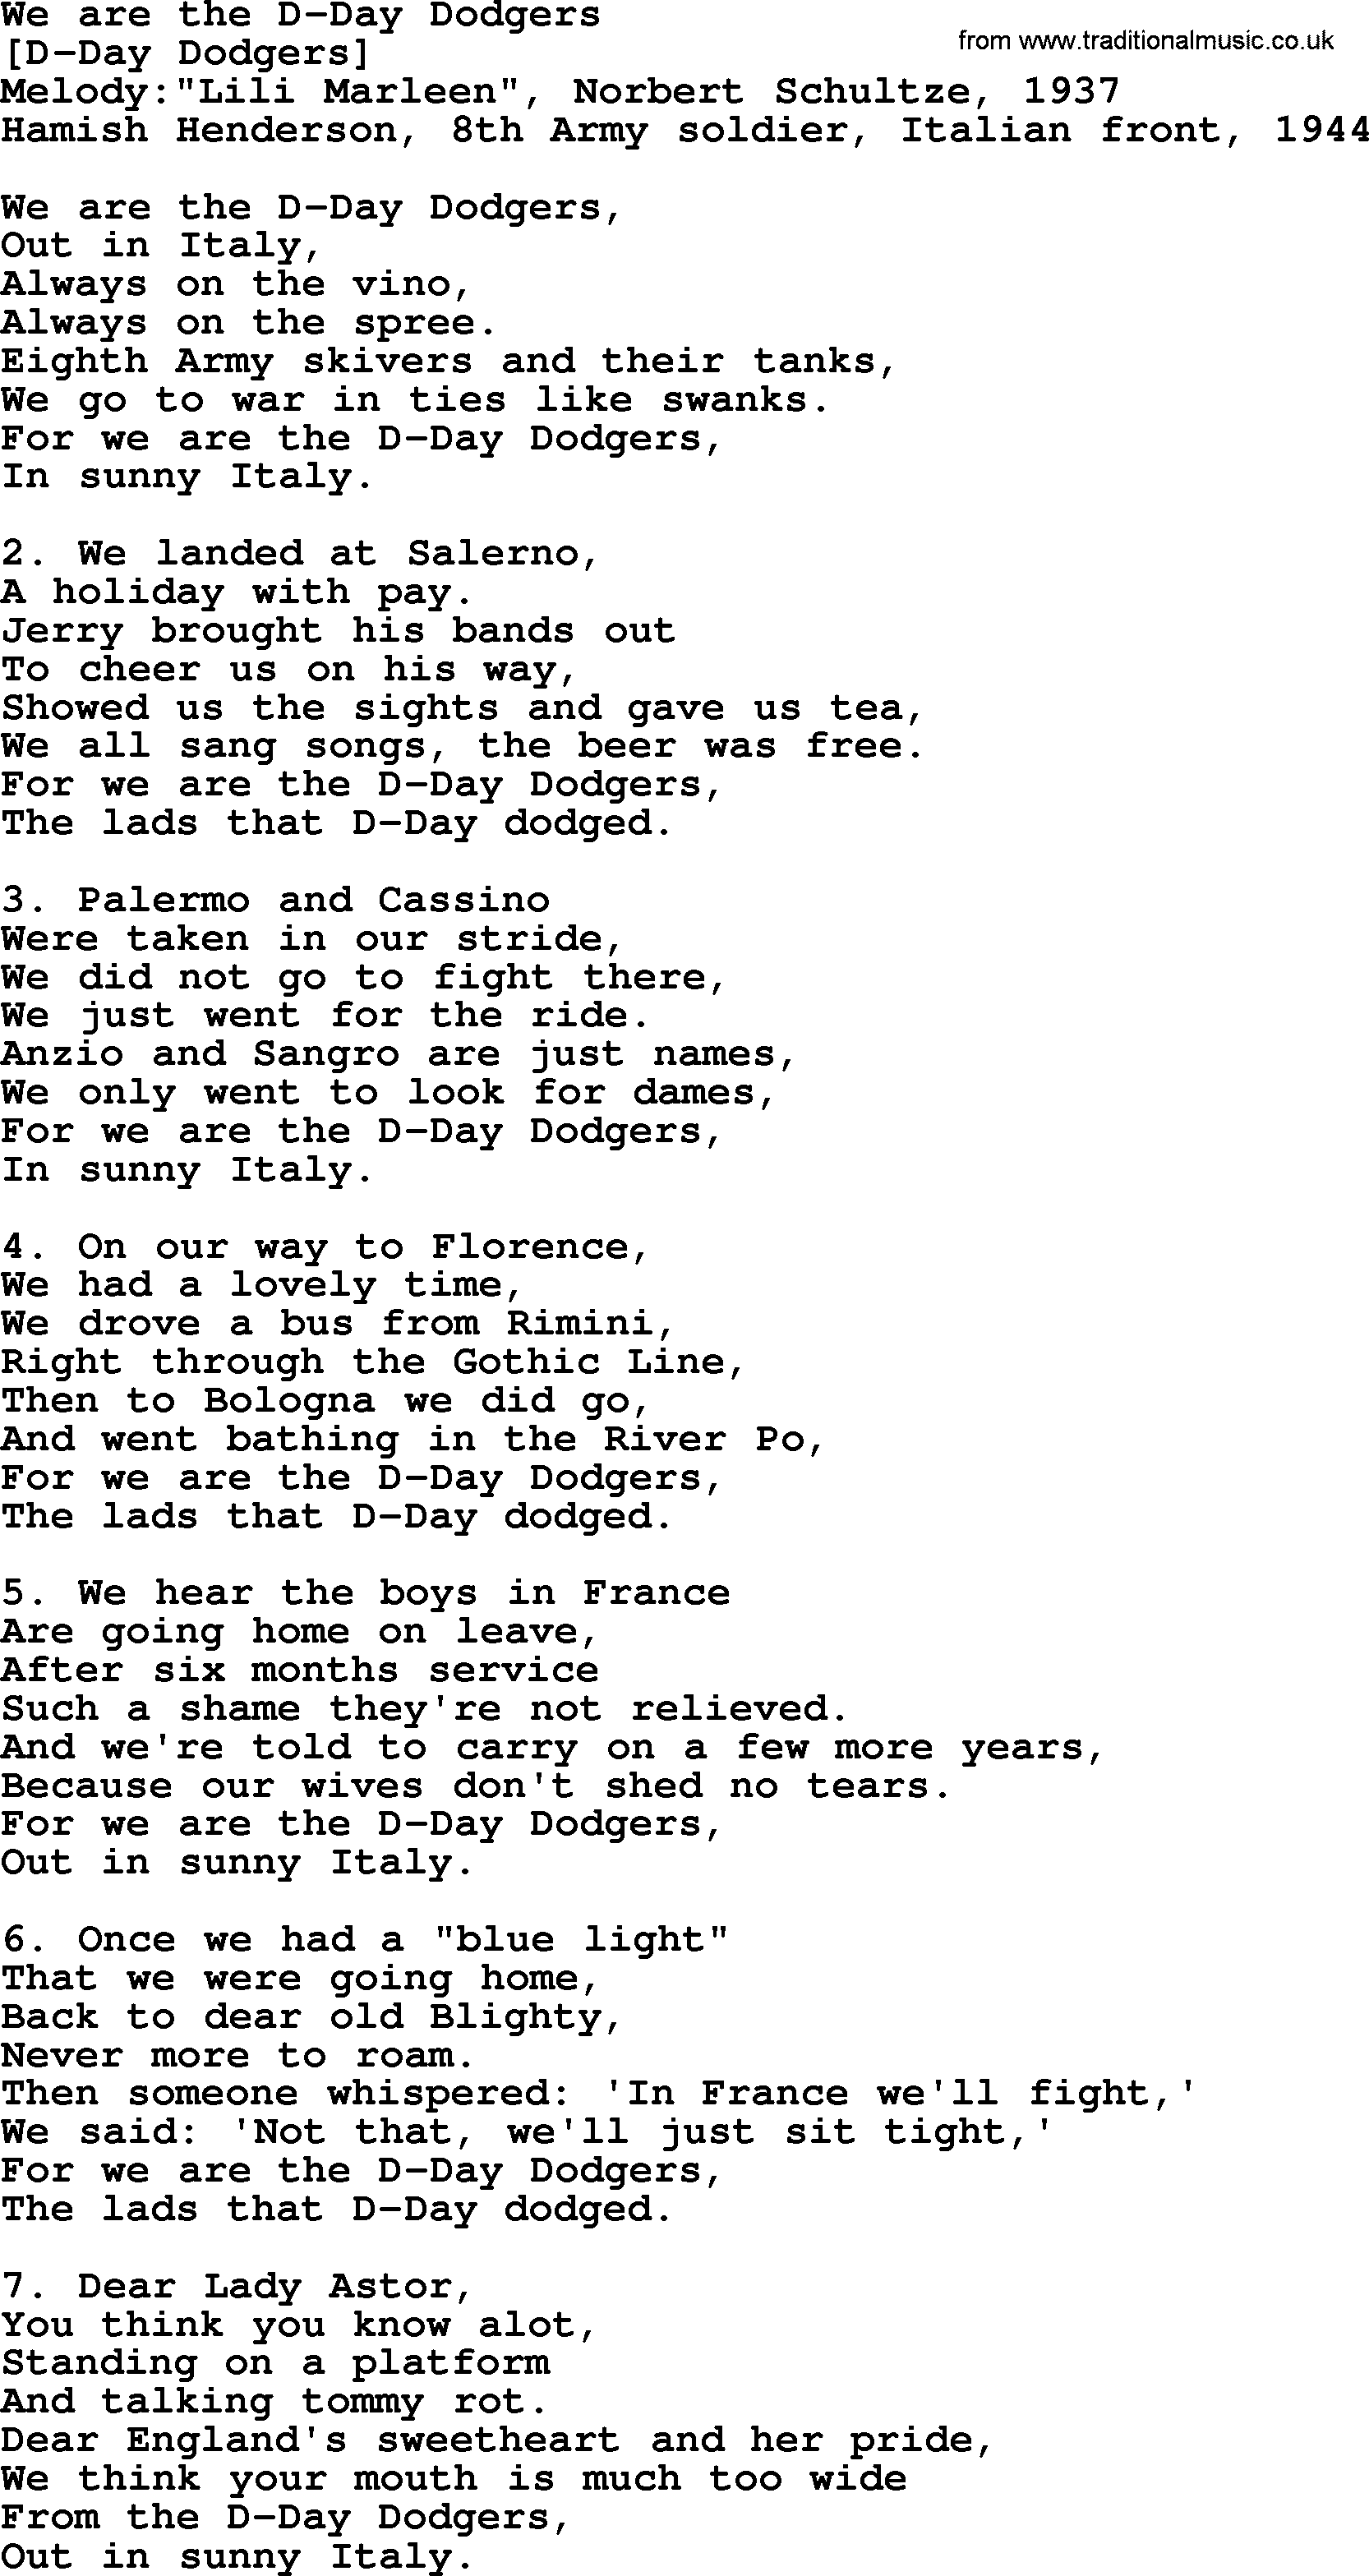 Old English Song: We Are The D-Day Dodgers lyrics